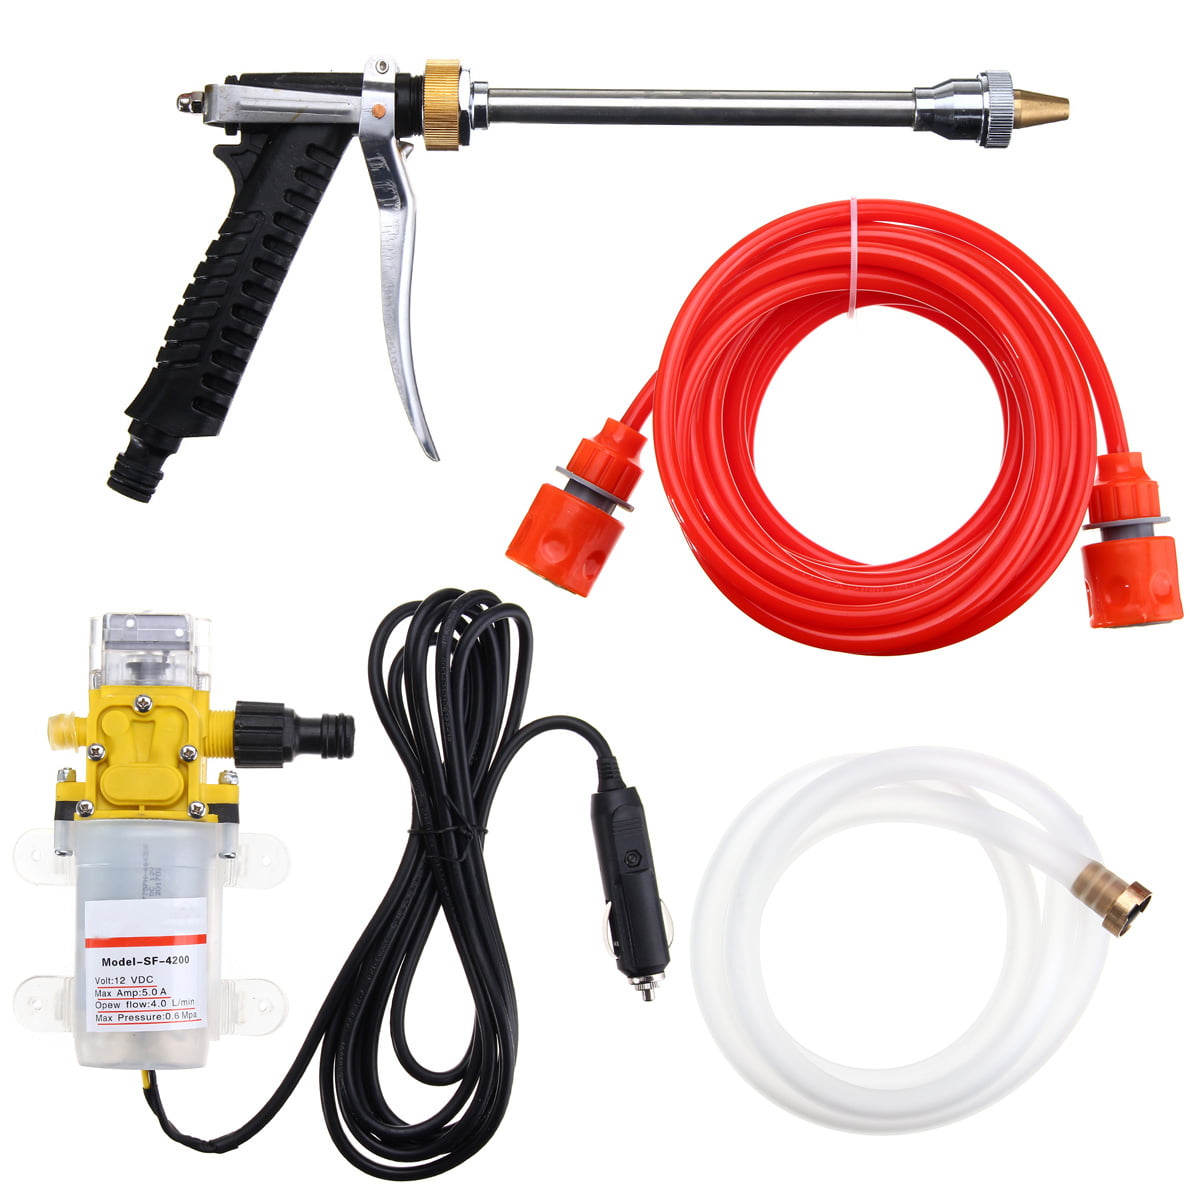 12V 100W High Pressure Water Pump Sprayer Car Washing Camping,Cleaning 